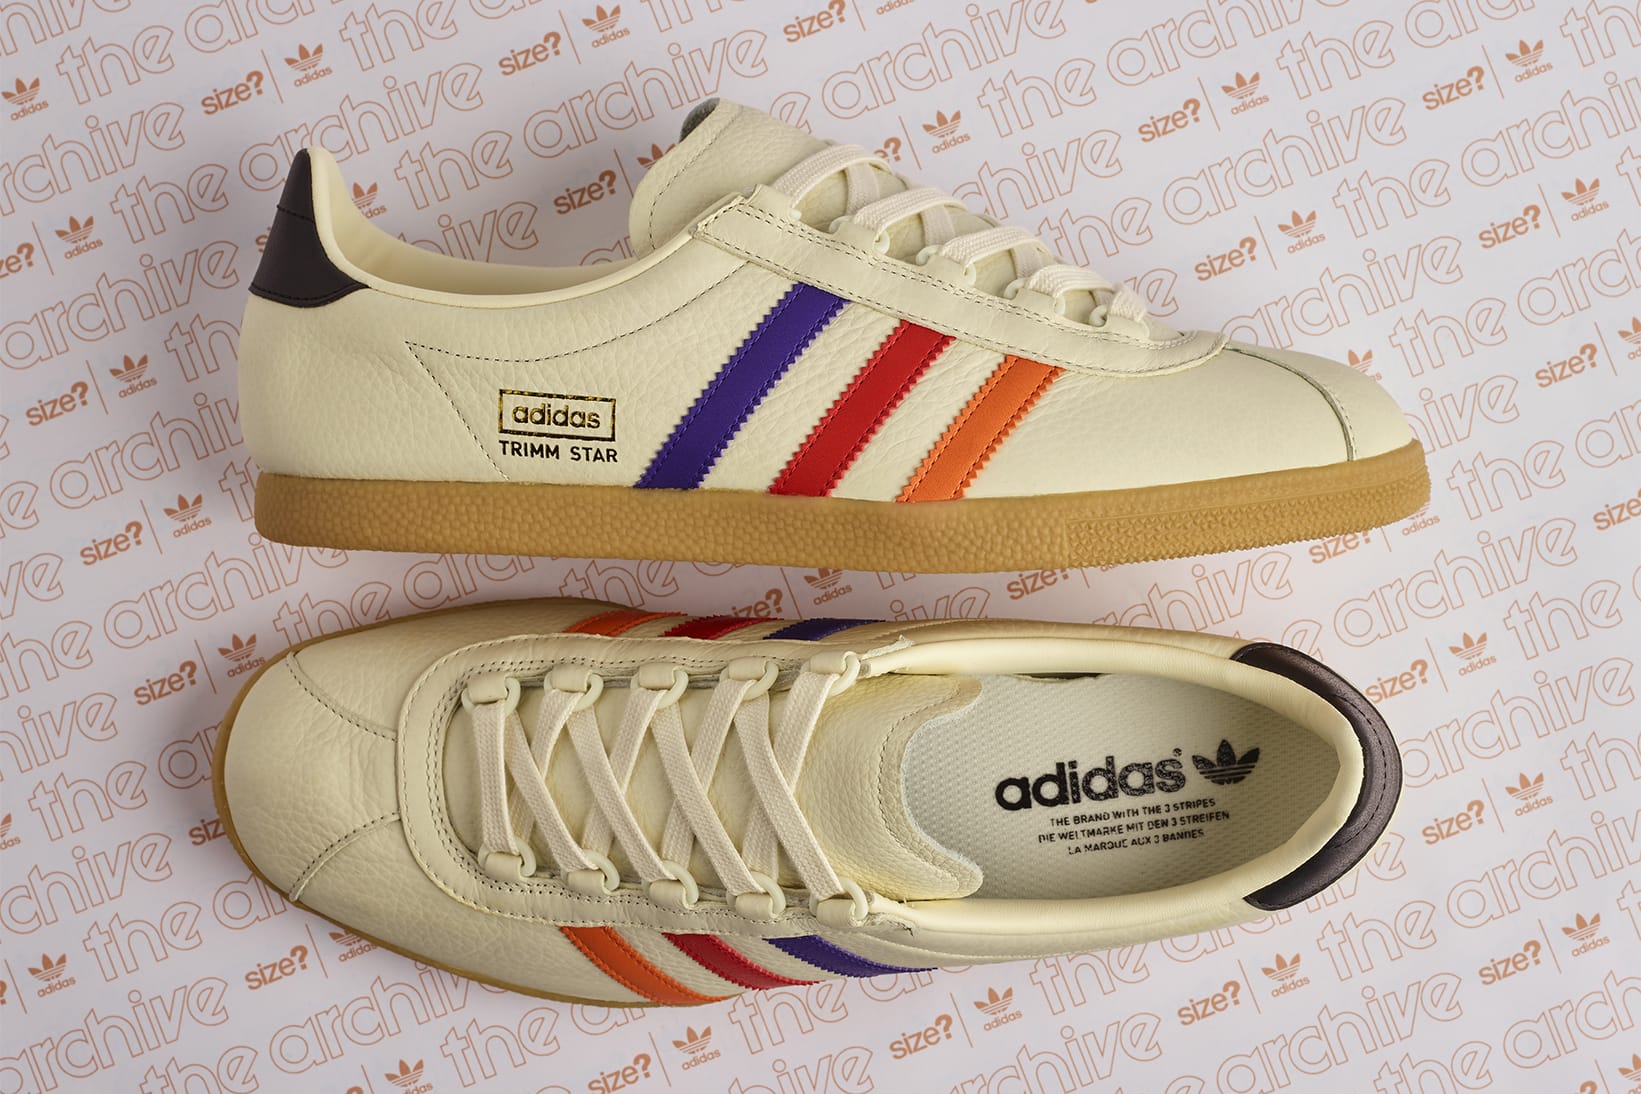 adidas trimm star new release 2019